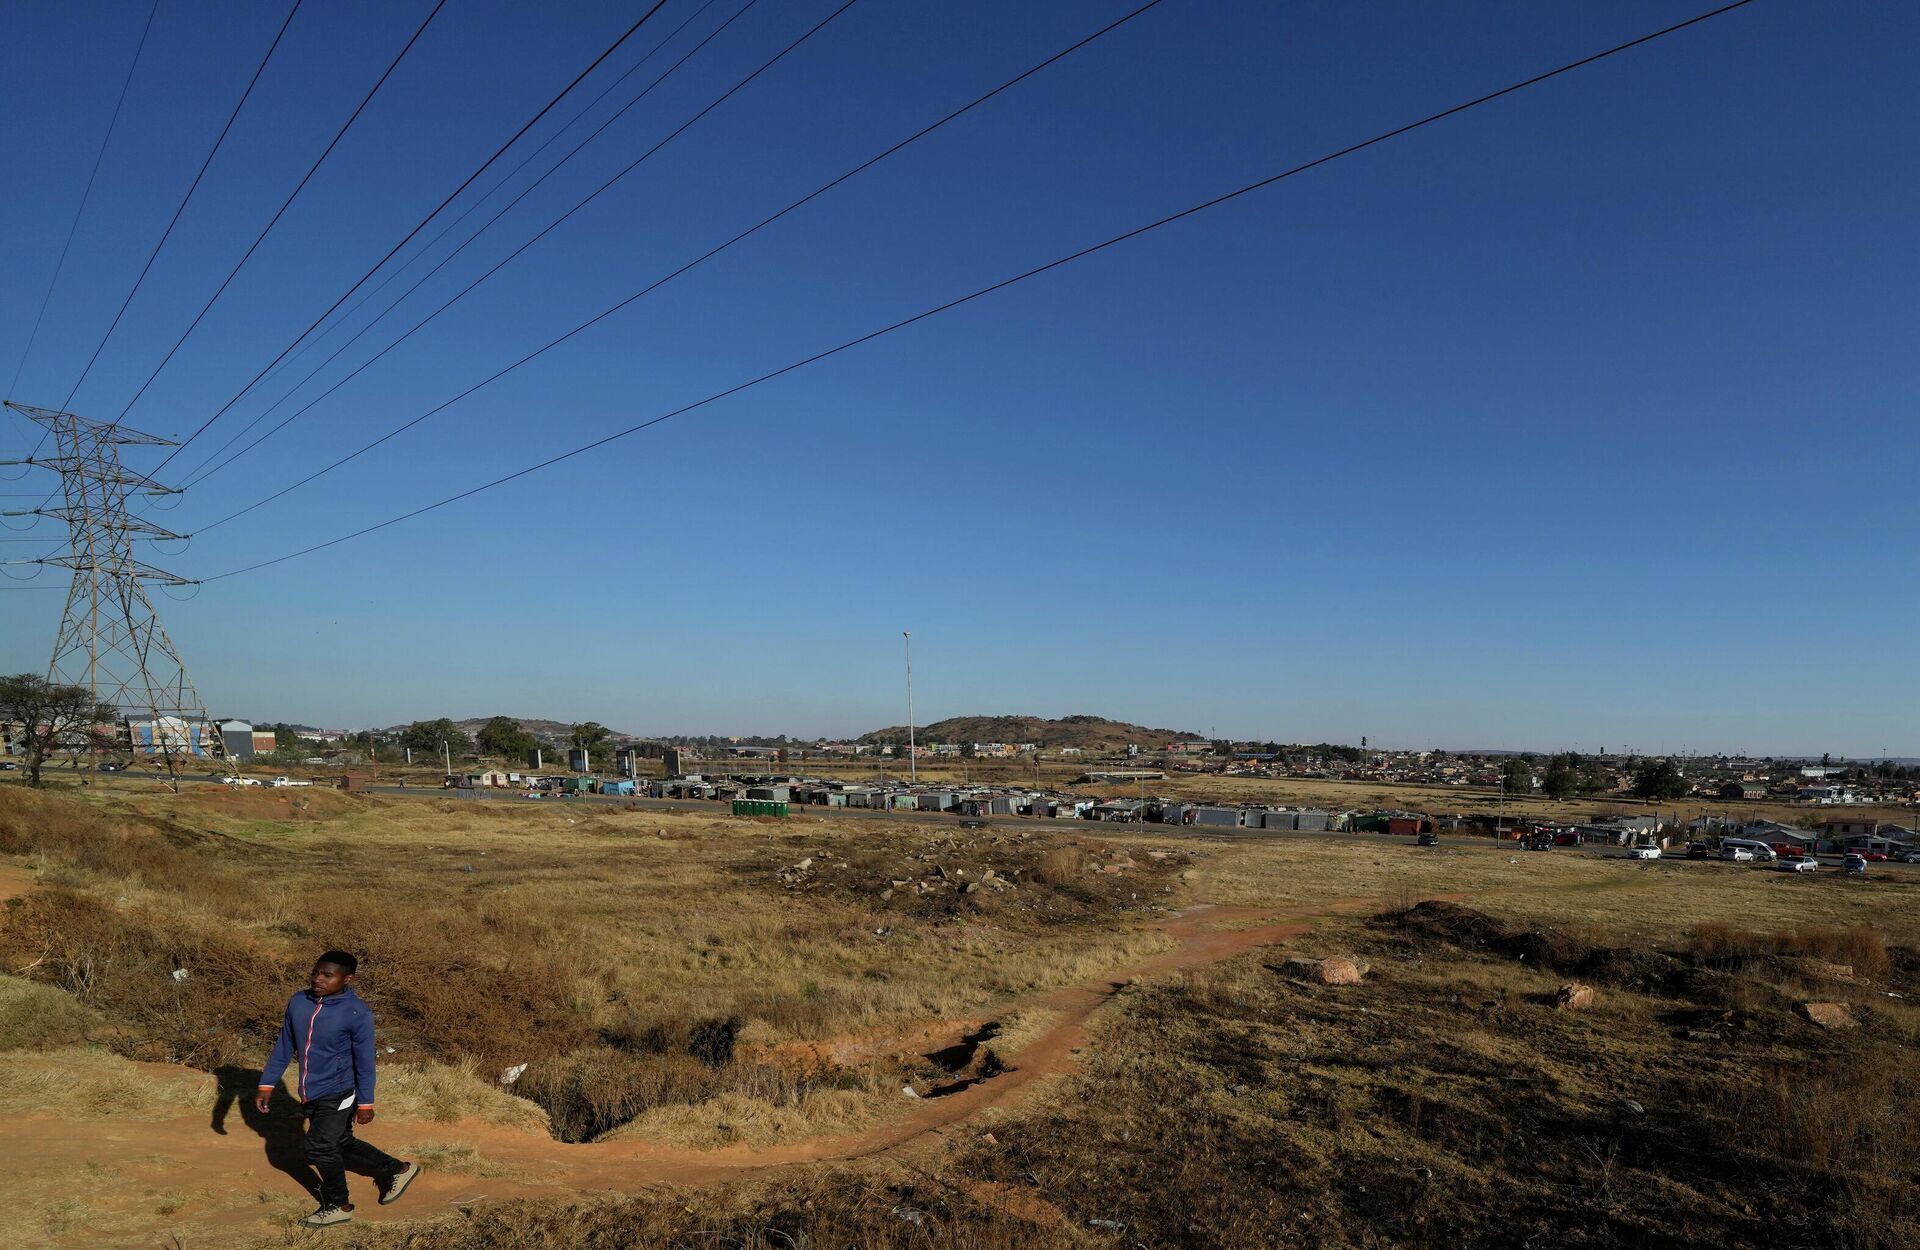 A man walks under the electricity power lines in Nomzamo Park, Soweto, Soweto, South Africa, Thursday, July 14, 2022. (AP Photo/Themba Hadebe) - Sputnik International, 1920, 11.09.2022